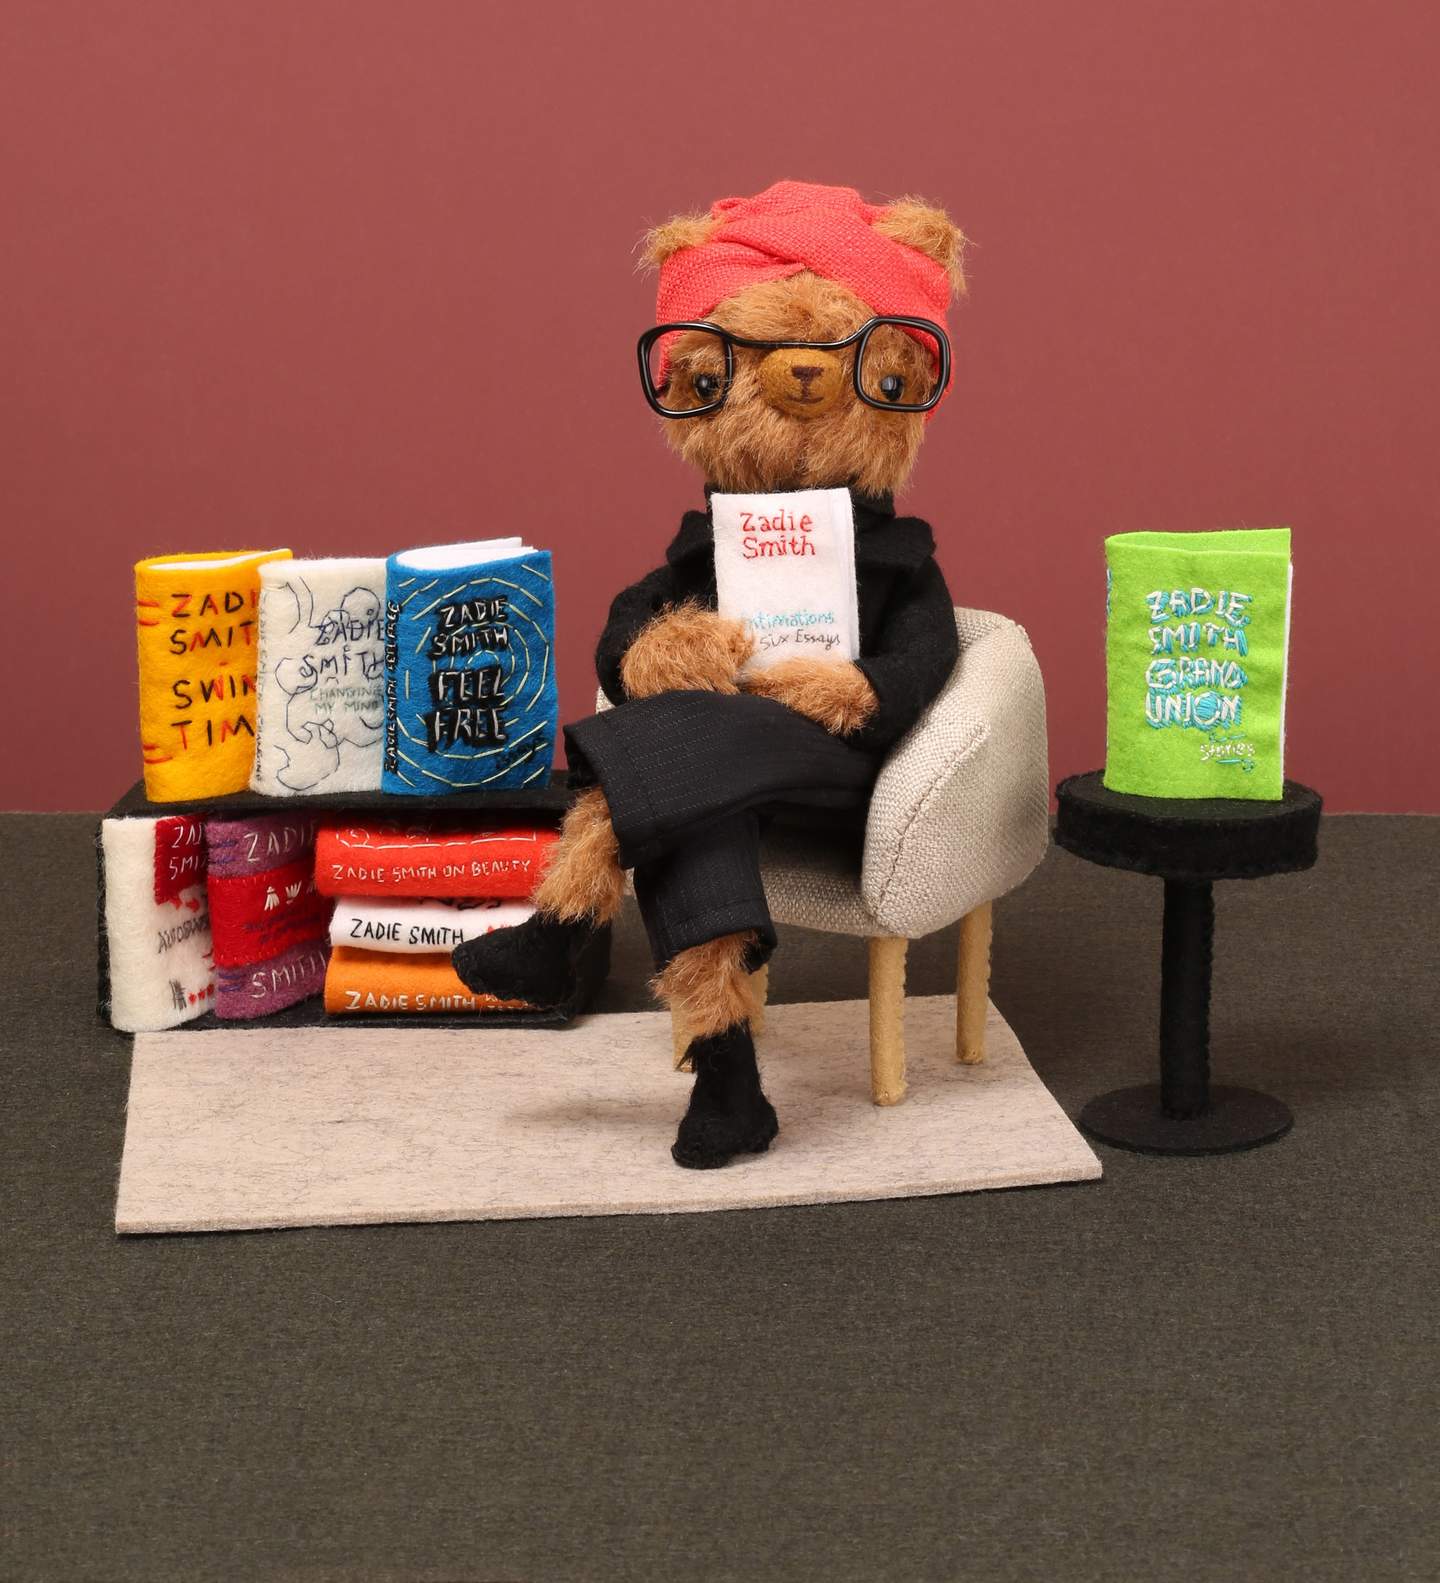 A three dimensional felted and fabric scene of books on a shelf and a seated bear holding up a book.